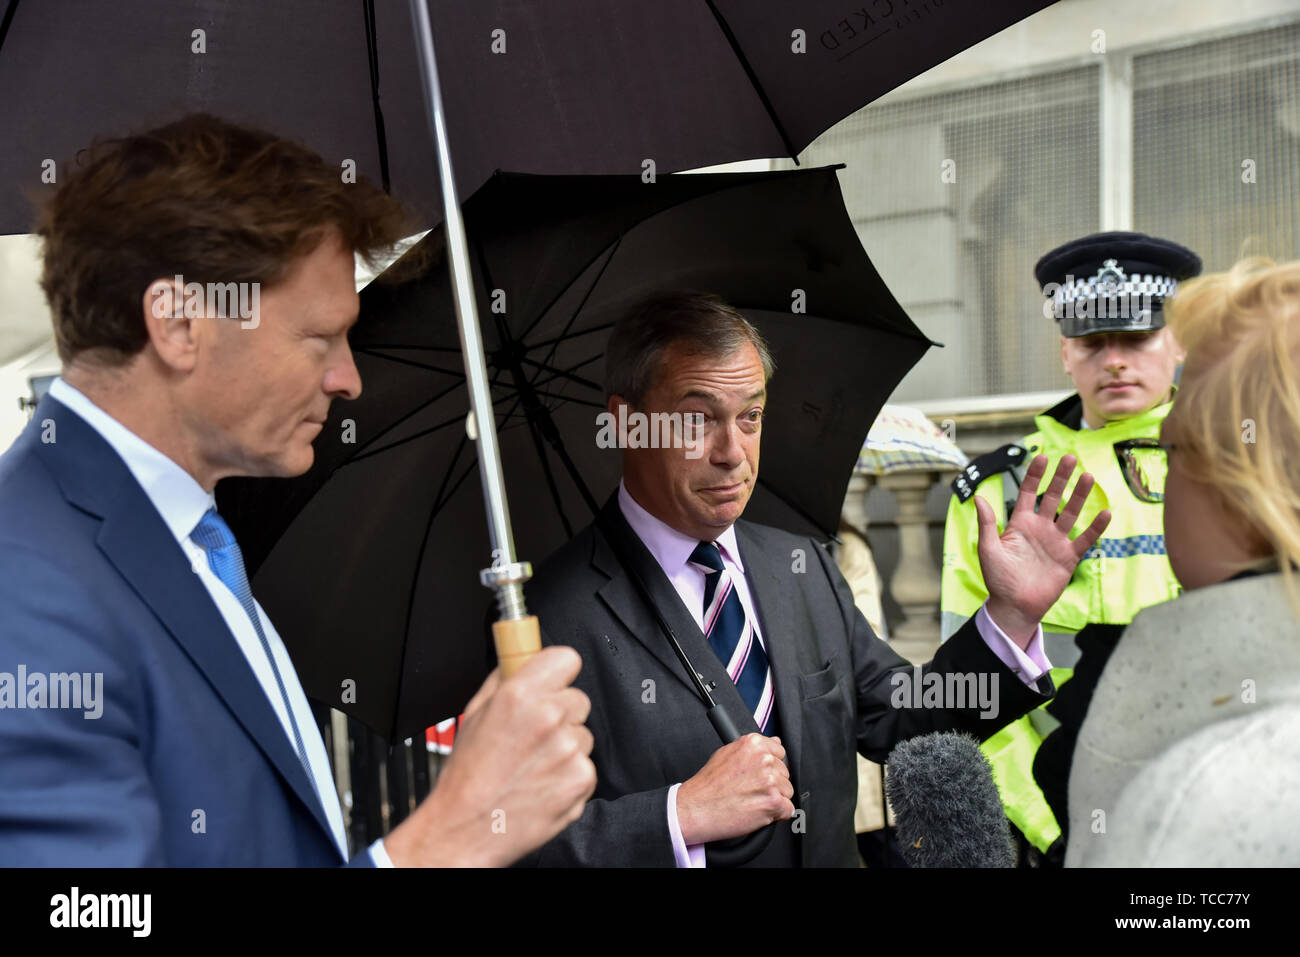 Downing Street, London, UK. 7th Jun 2019. The Brexit Party leader Nigel Farage and Richard Tice outside Downing Street after handing in a letter demanding a seat at the EU negotiations. Credit: Matthew Chattle/Alamy Live News Stock Photo